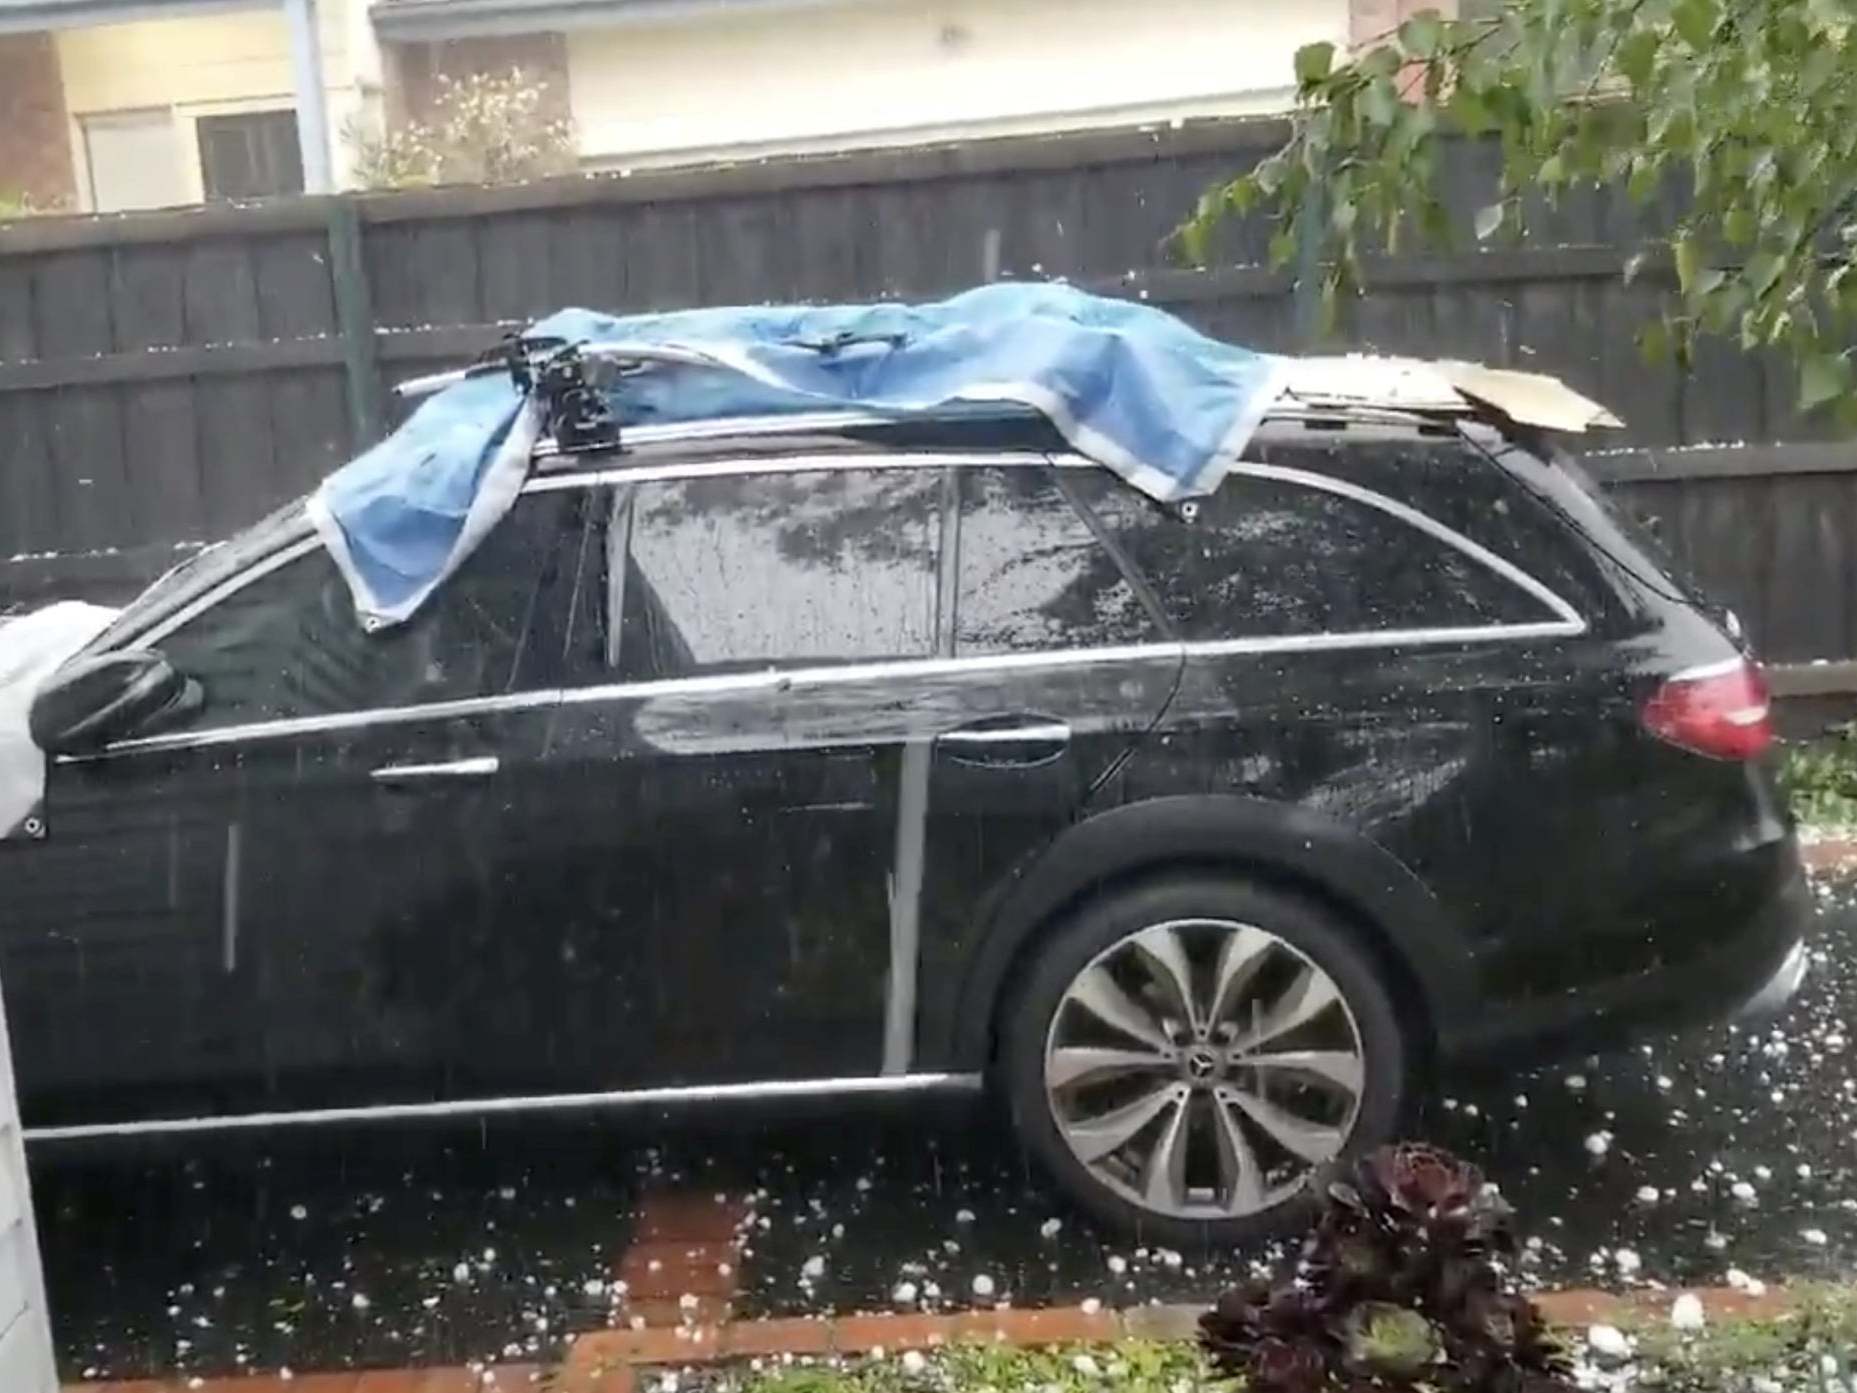 Australia weather: Melbourne battered by golf ball-sized hail as extreme conditions persist